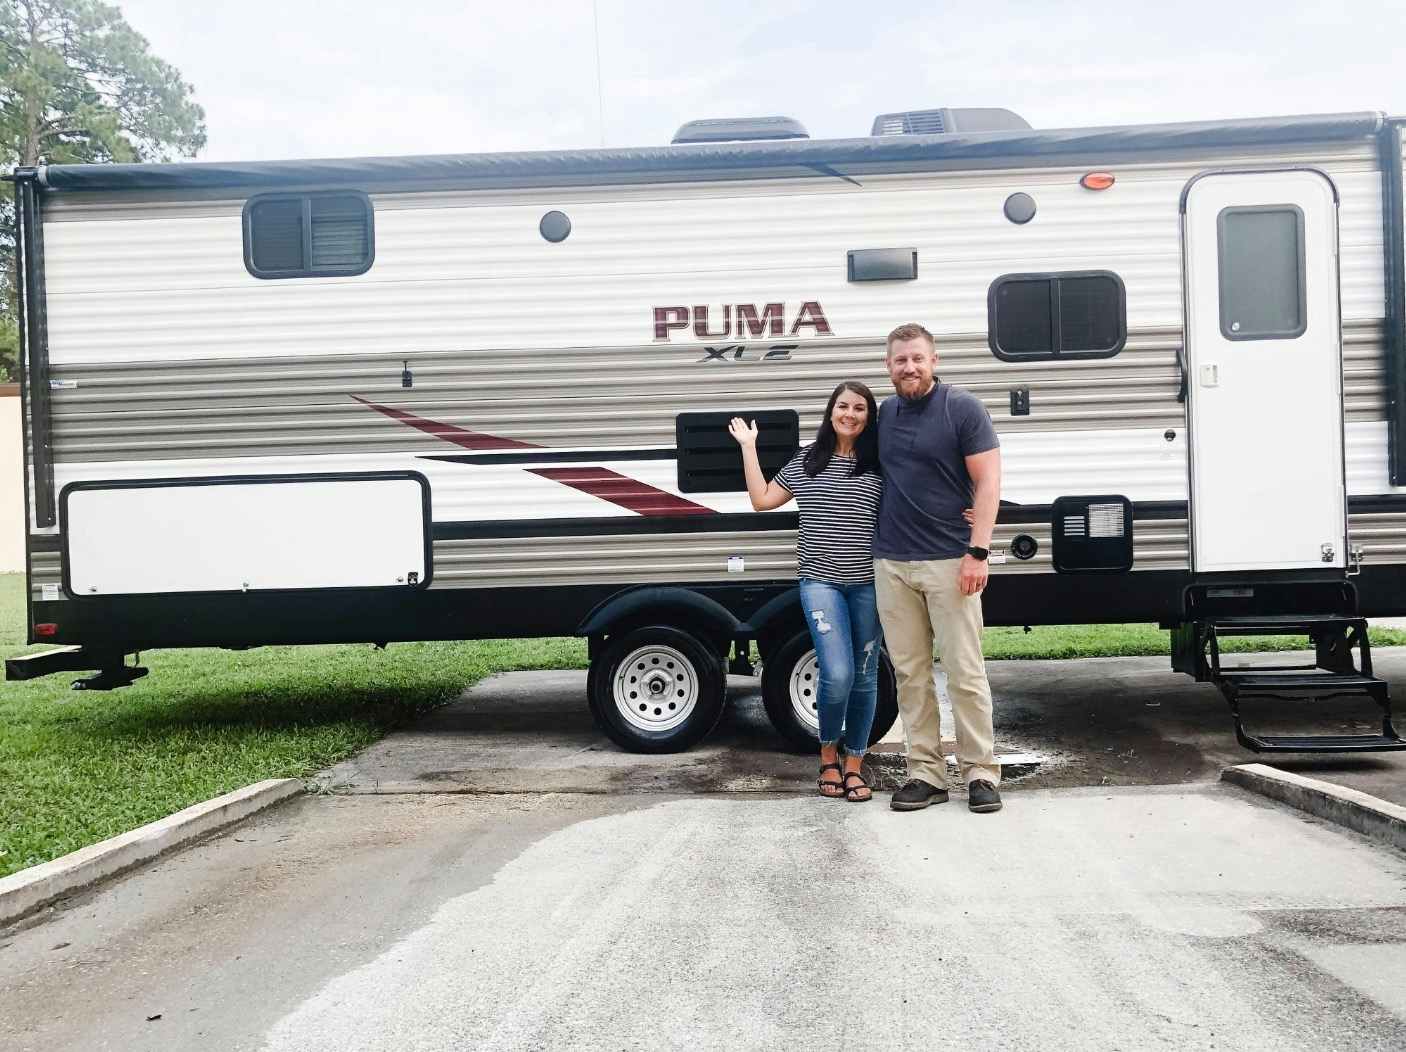 Man and woman standing in front a an RV